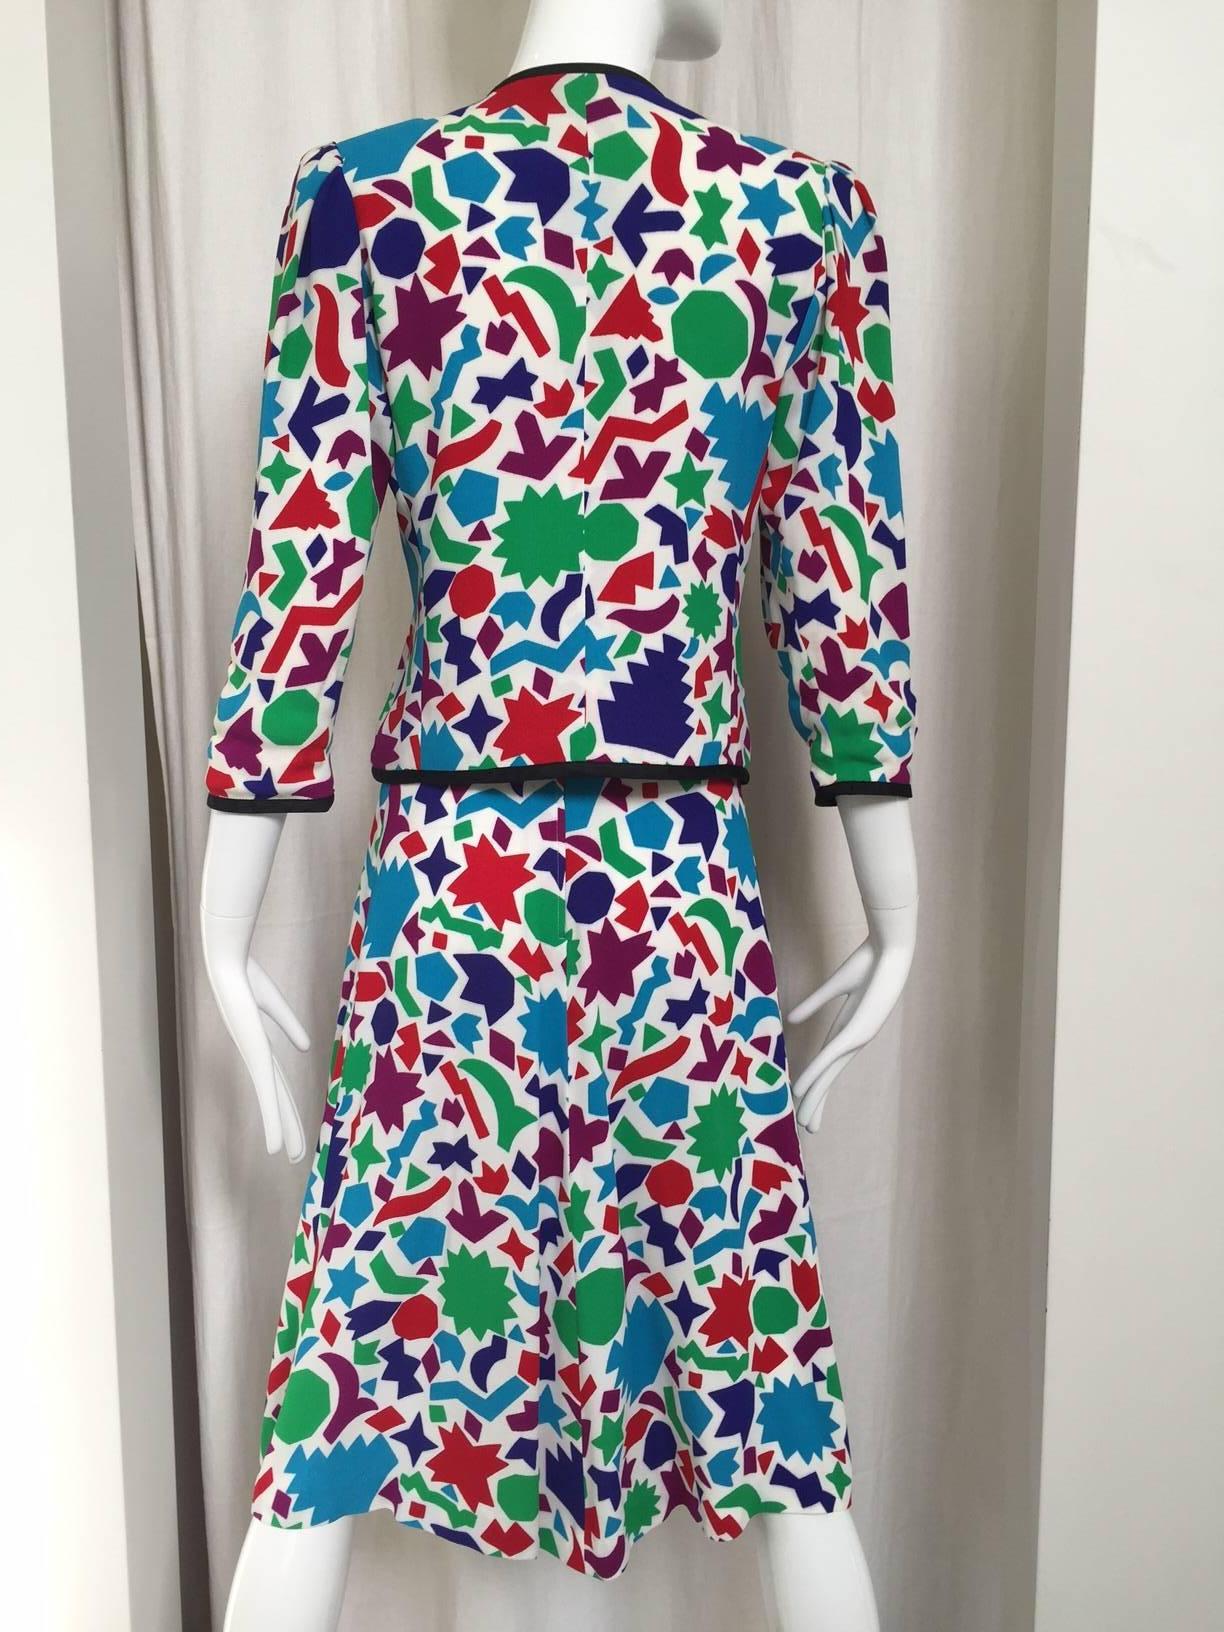 Vintage 70s Yves Saint Laurent blouse skirt set ensemble print in turqoise, red, green and purple color  tribute to Henri Mattise.  V neck 3/4 sleeve buttoned blouse and A line pleats knee length skirt. Perfect for summer casual party dress. Size: